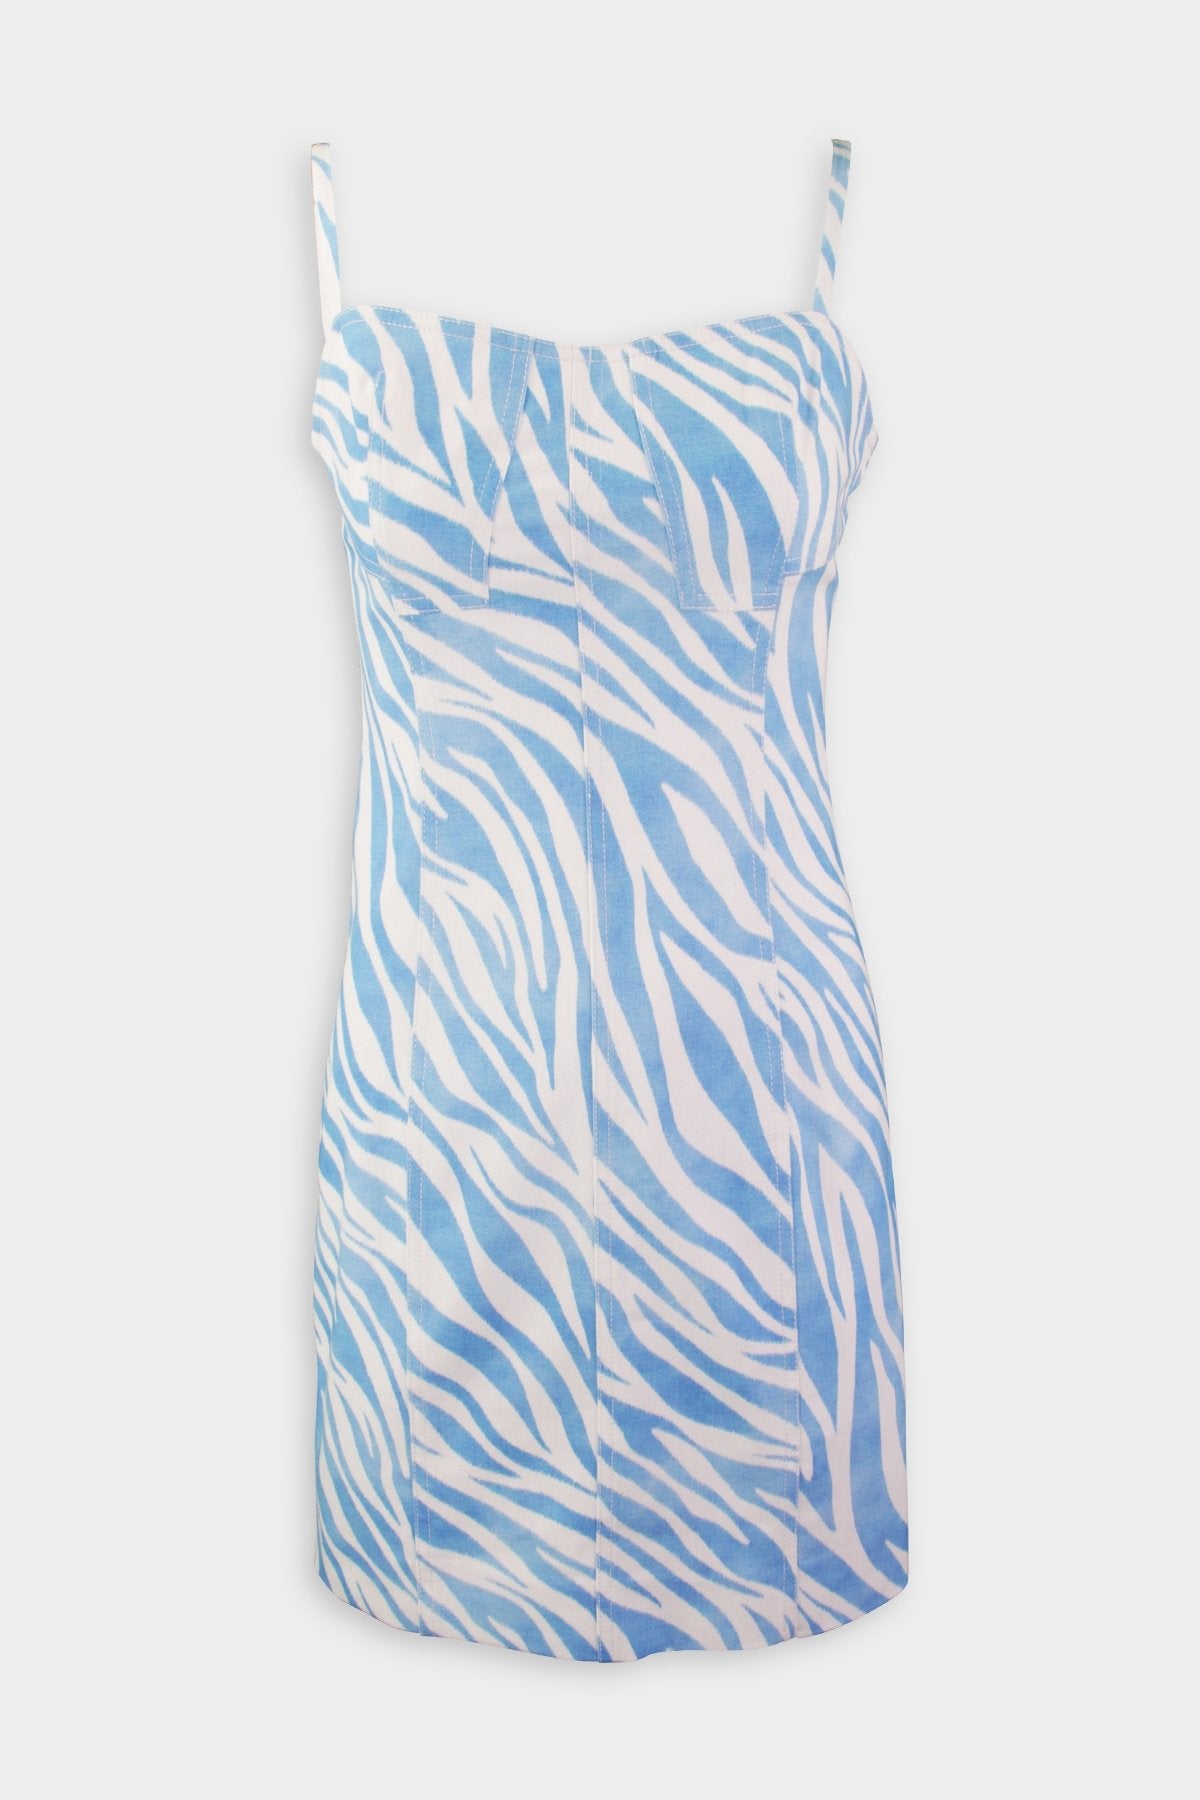 Blair Bustier Dress in White and Blue - shop-olivia.com